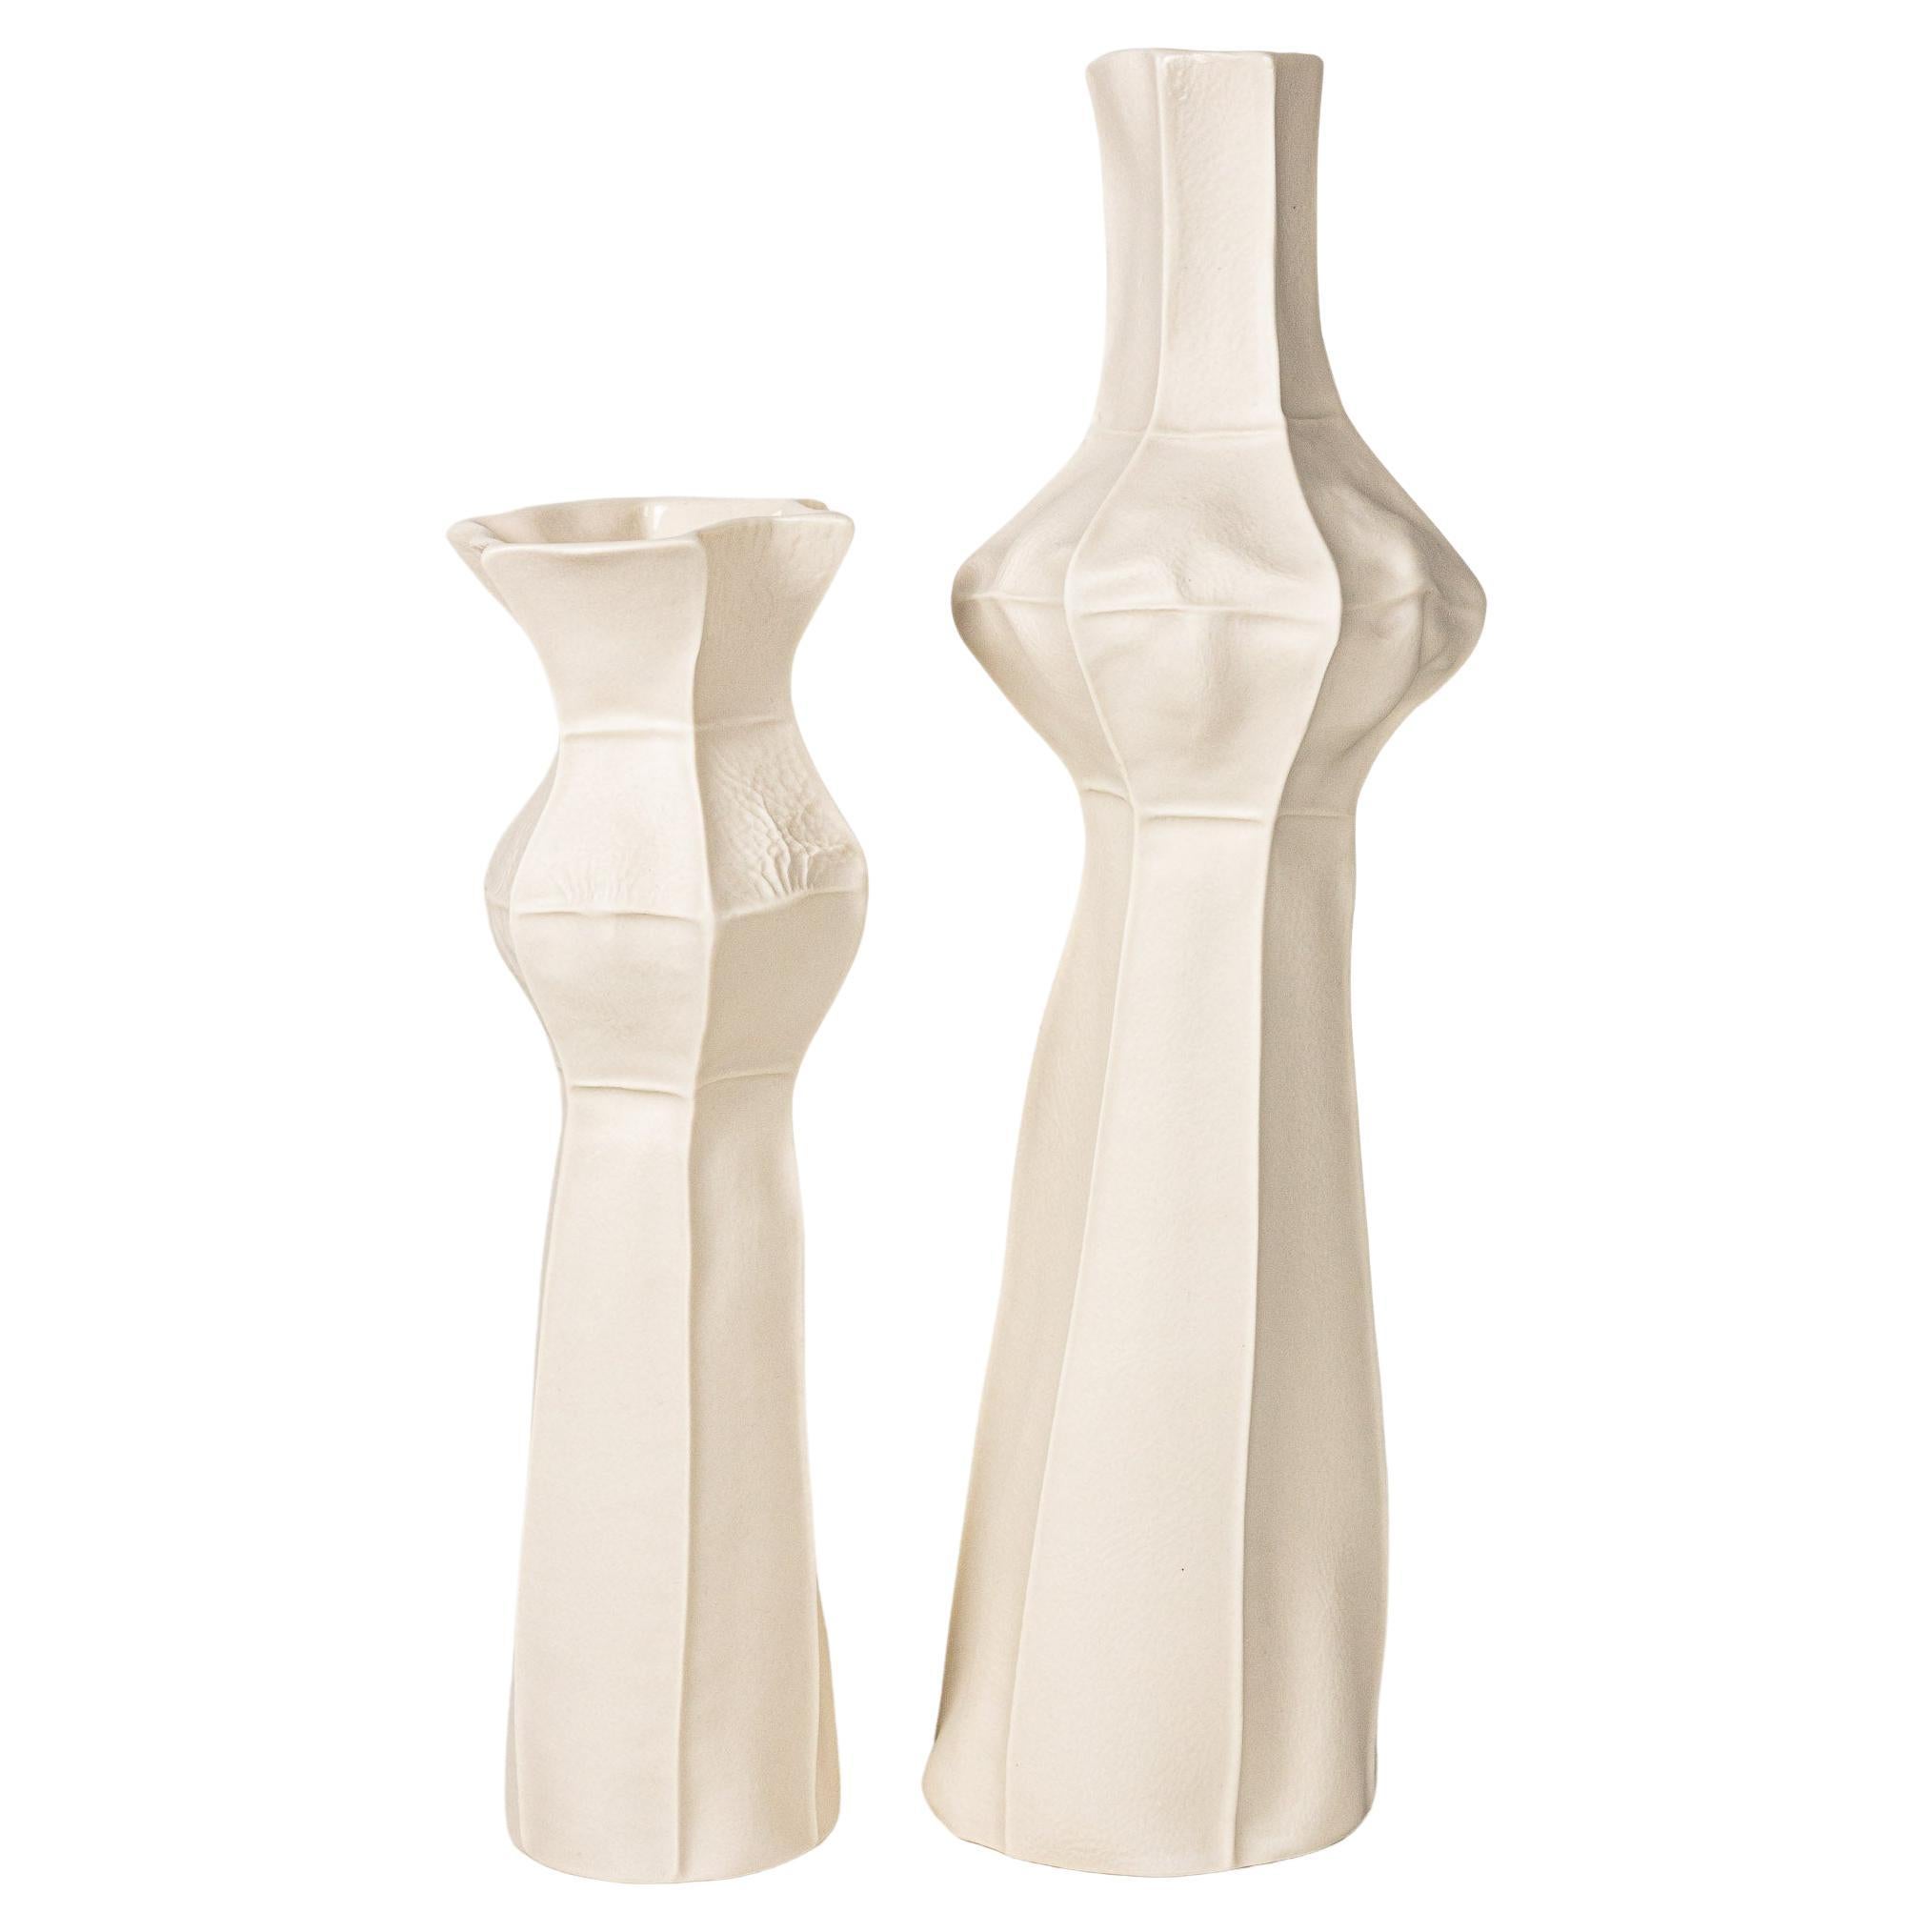 Pair of Tall White Ceramic Kawa Vases, Leather cast Porcelain, Organic For Sale